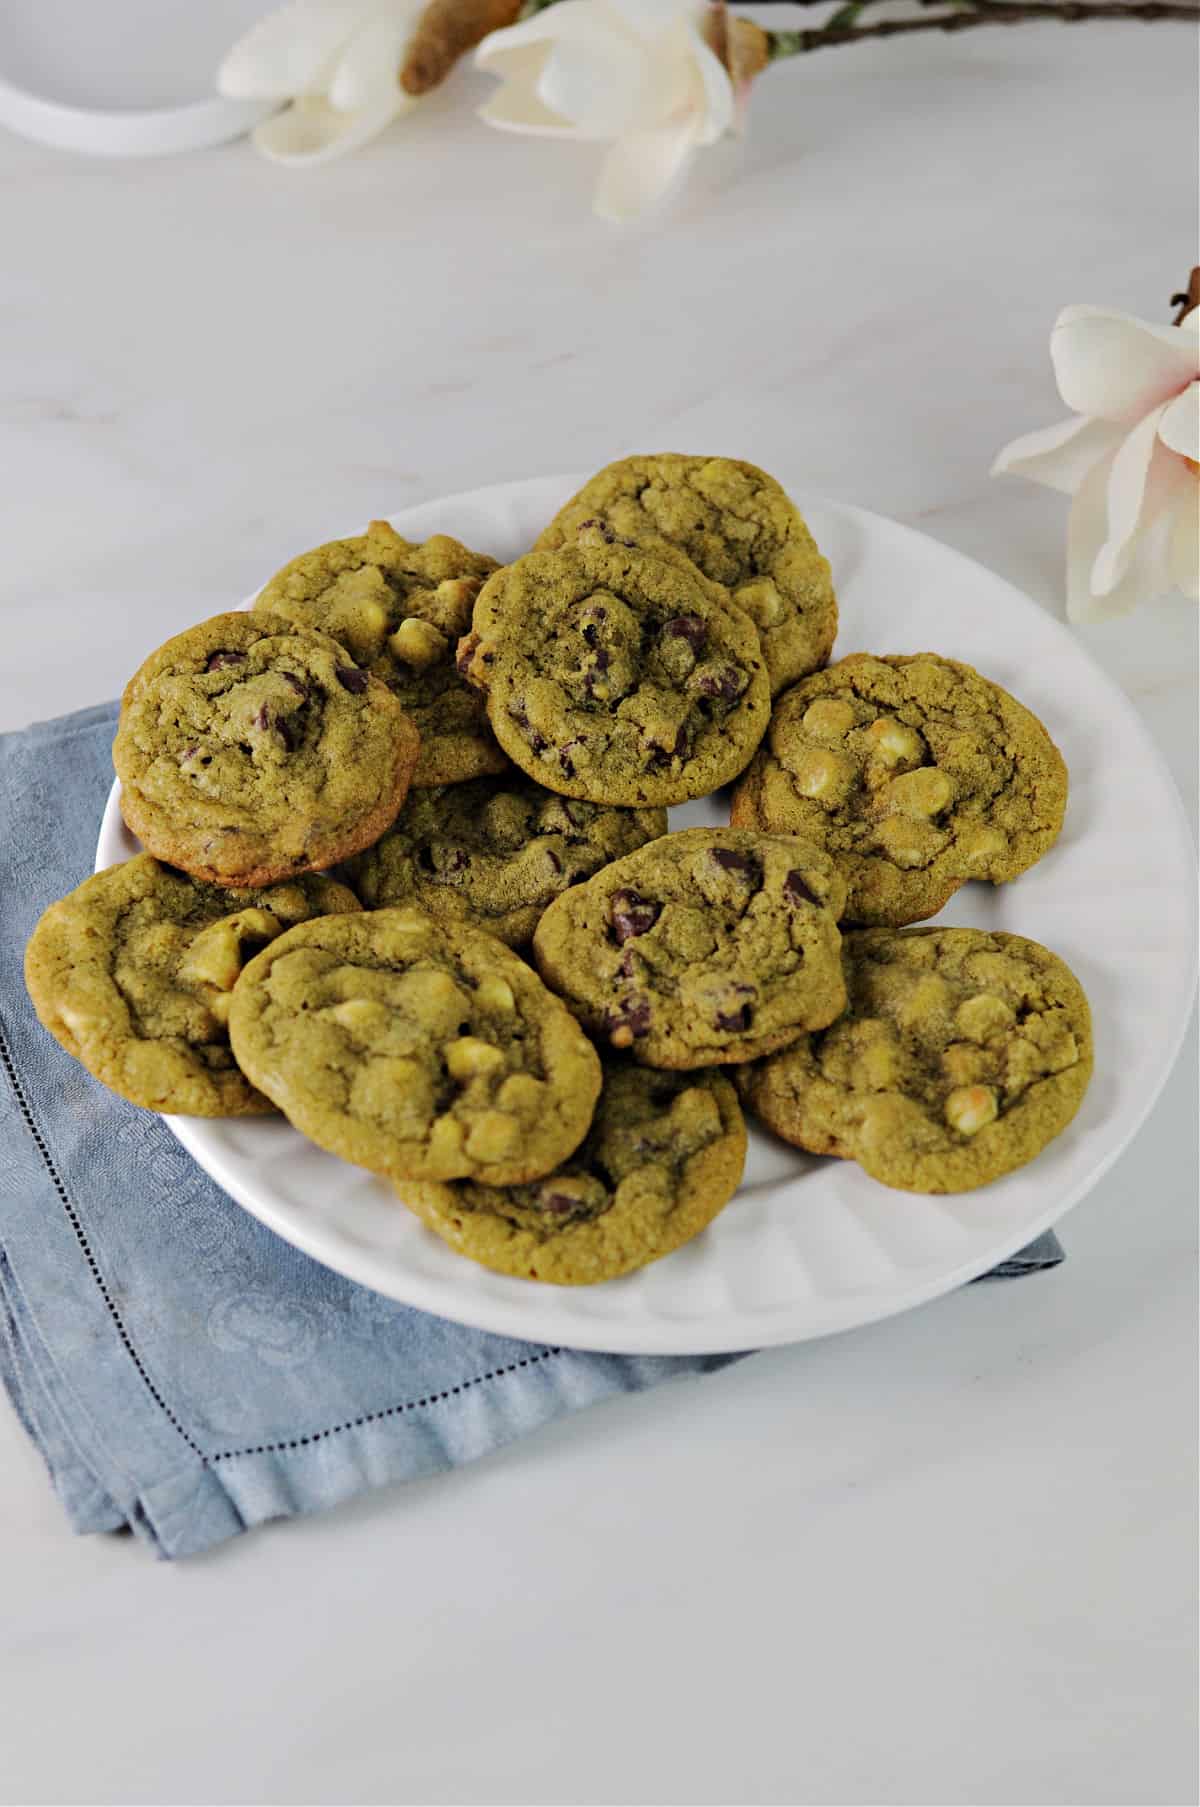 Matcha chocolate chip cookies served on a white plate.